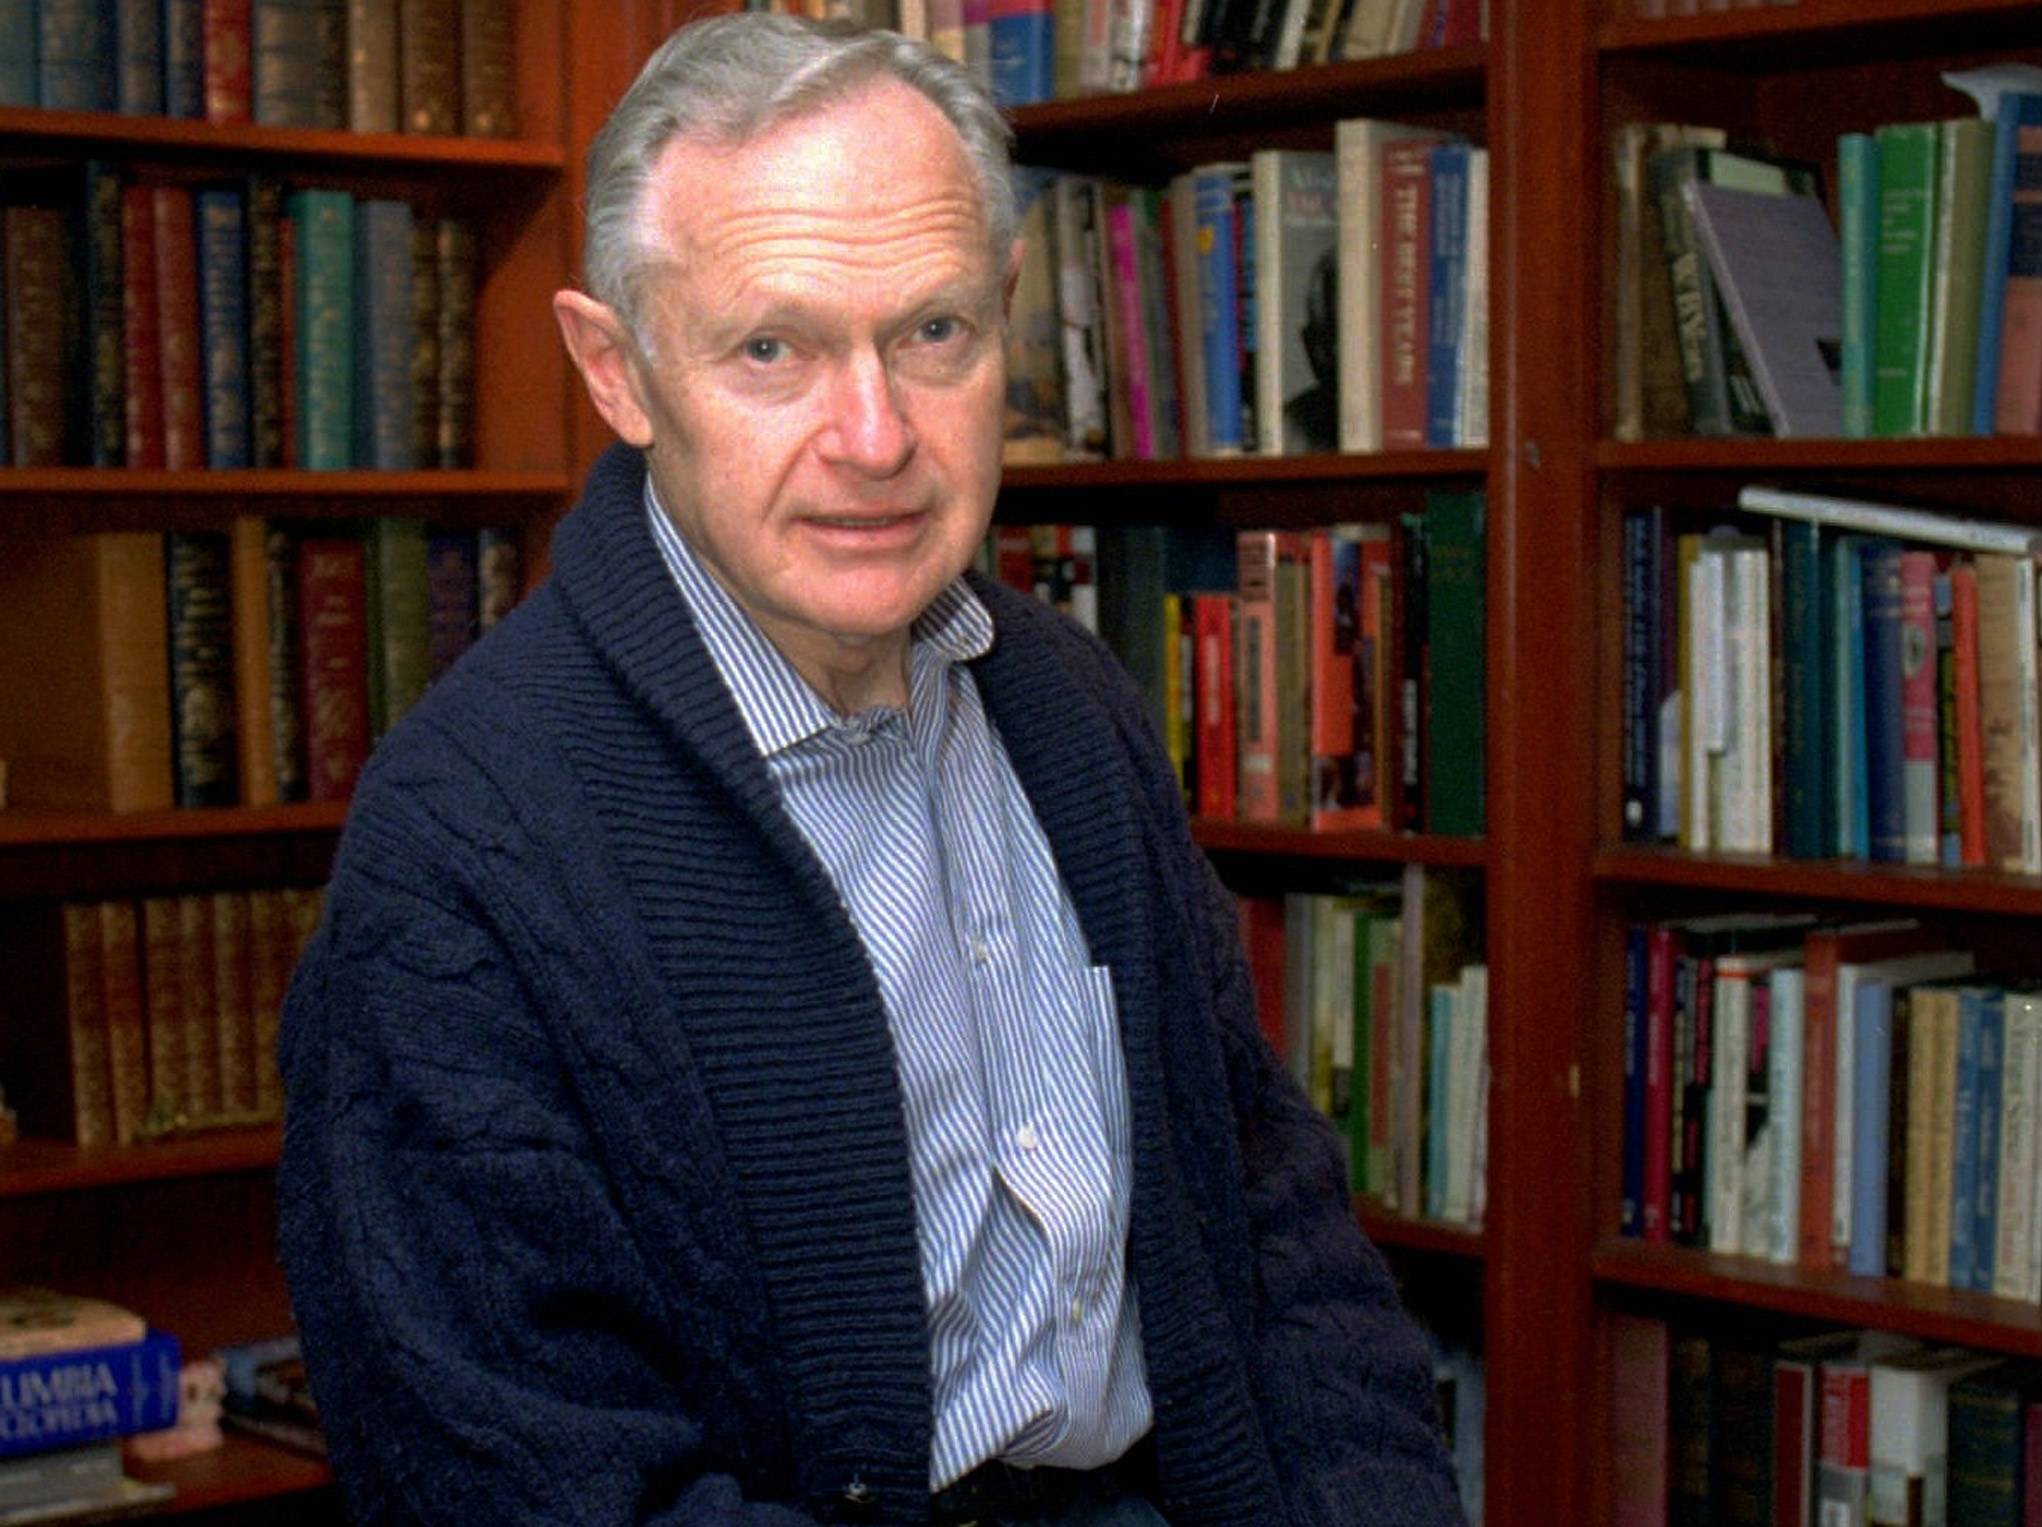 Sherwin Nuland, pictured in 1996, in his home study in Hamden